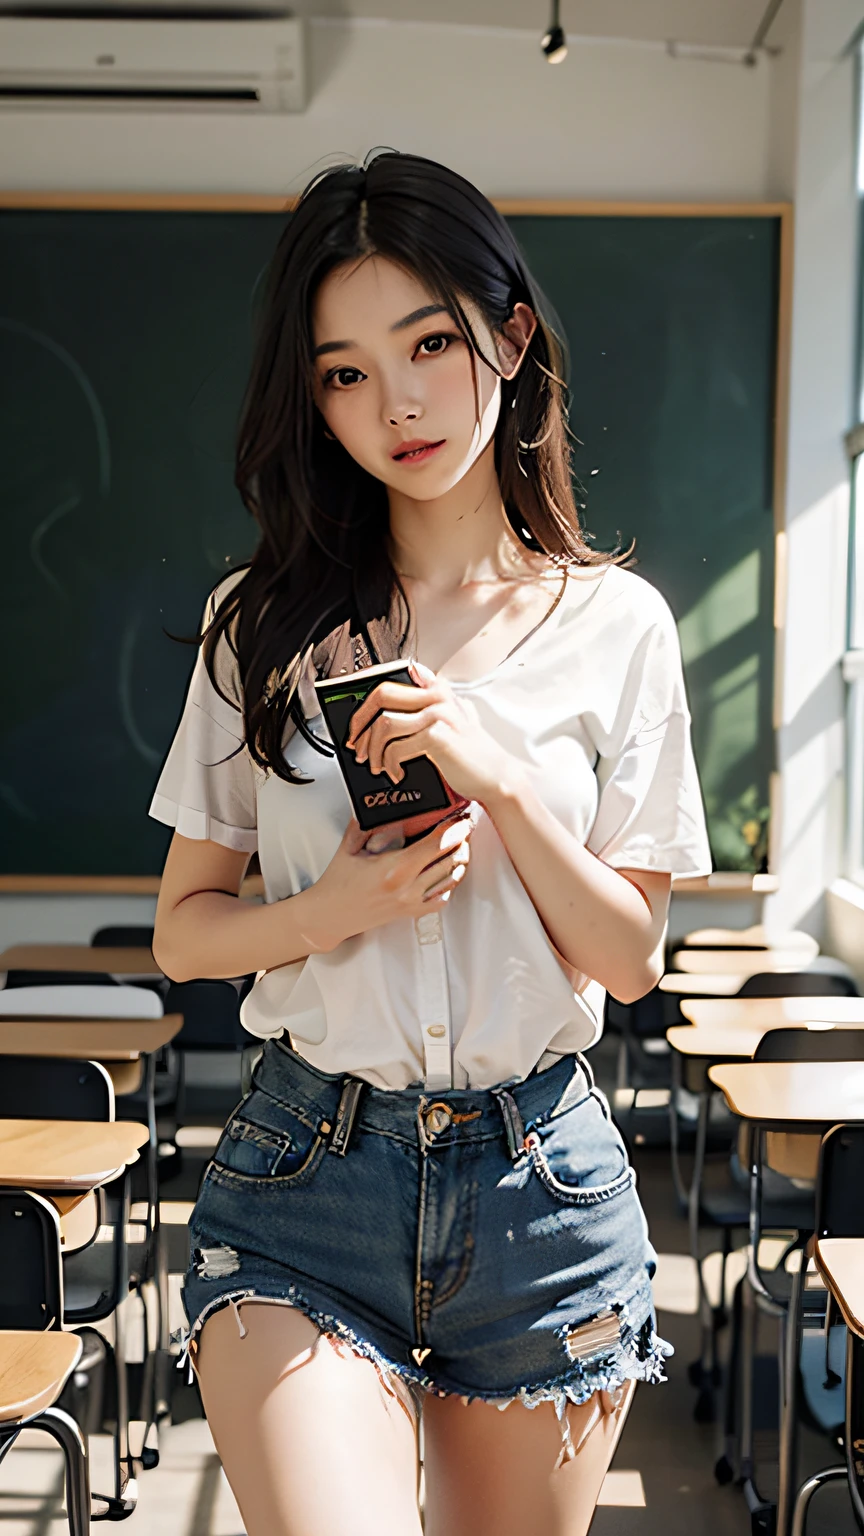 Beautiful woman, holding a book in the classroom, short clothes